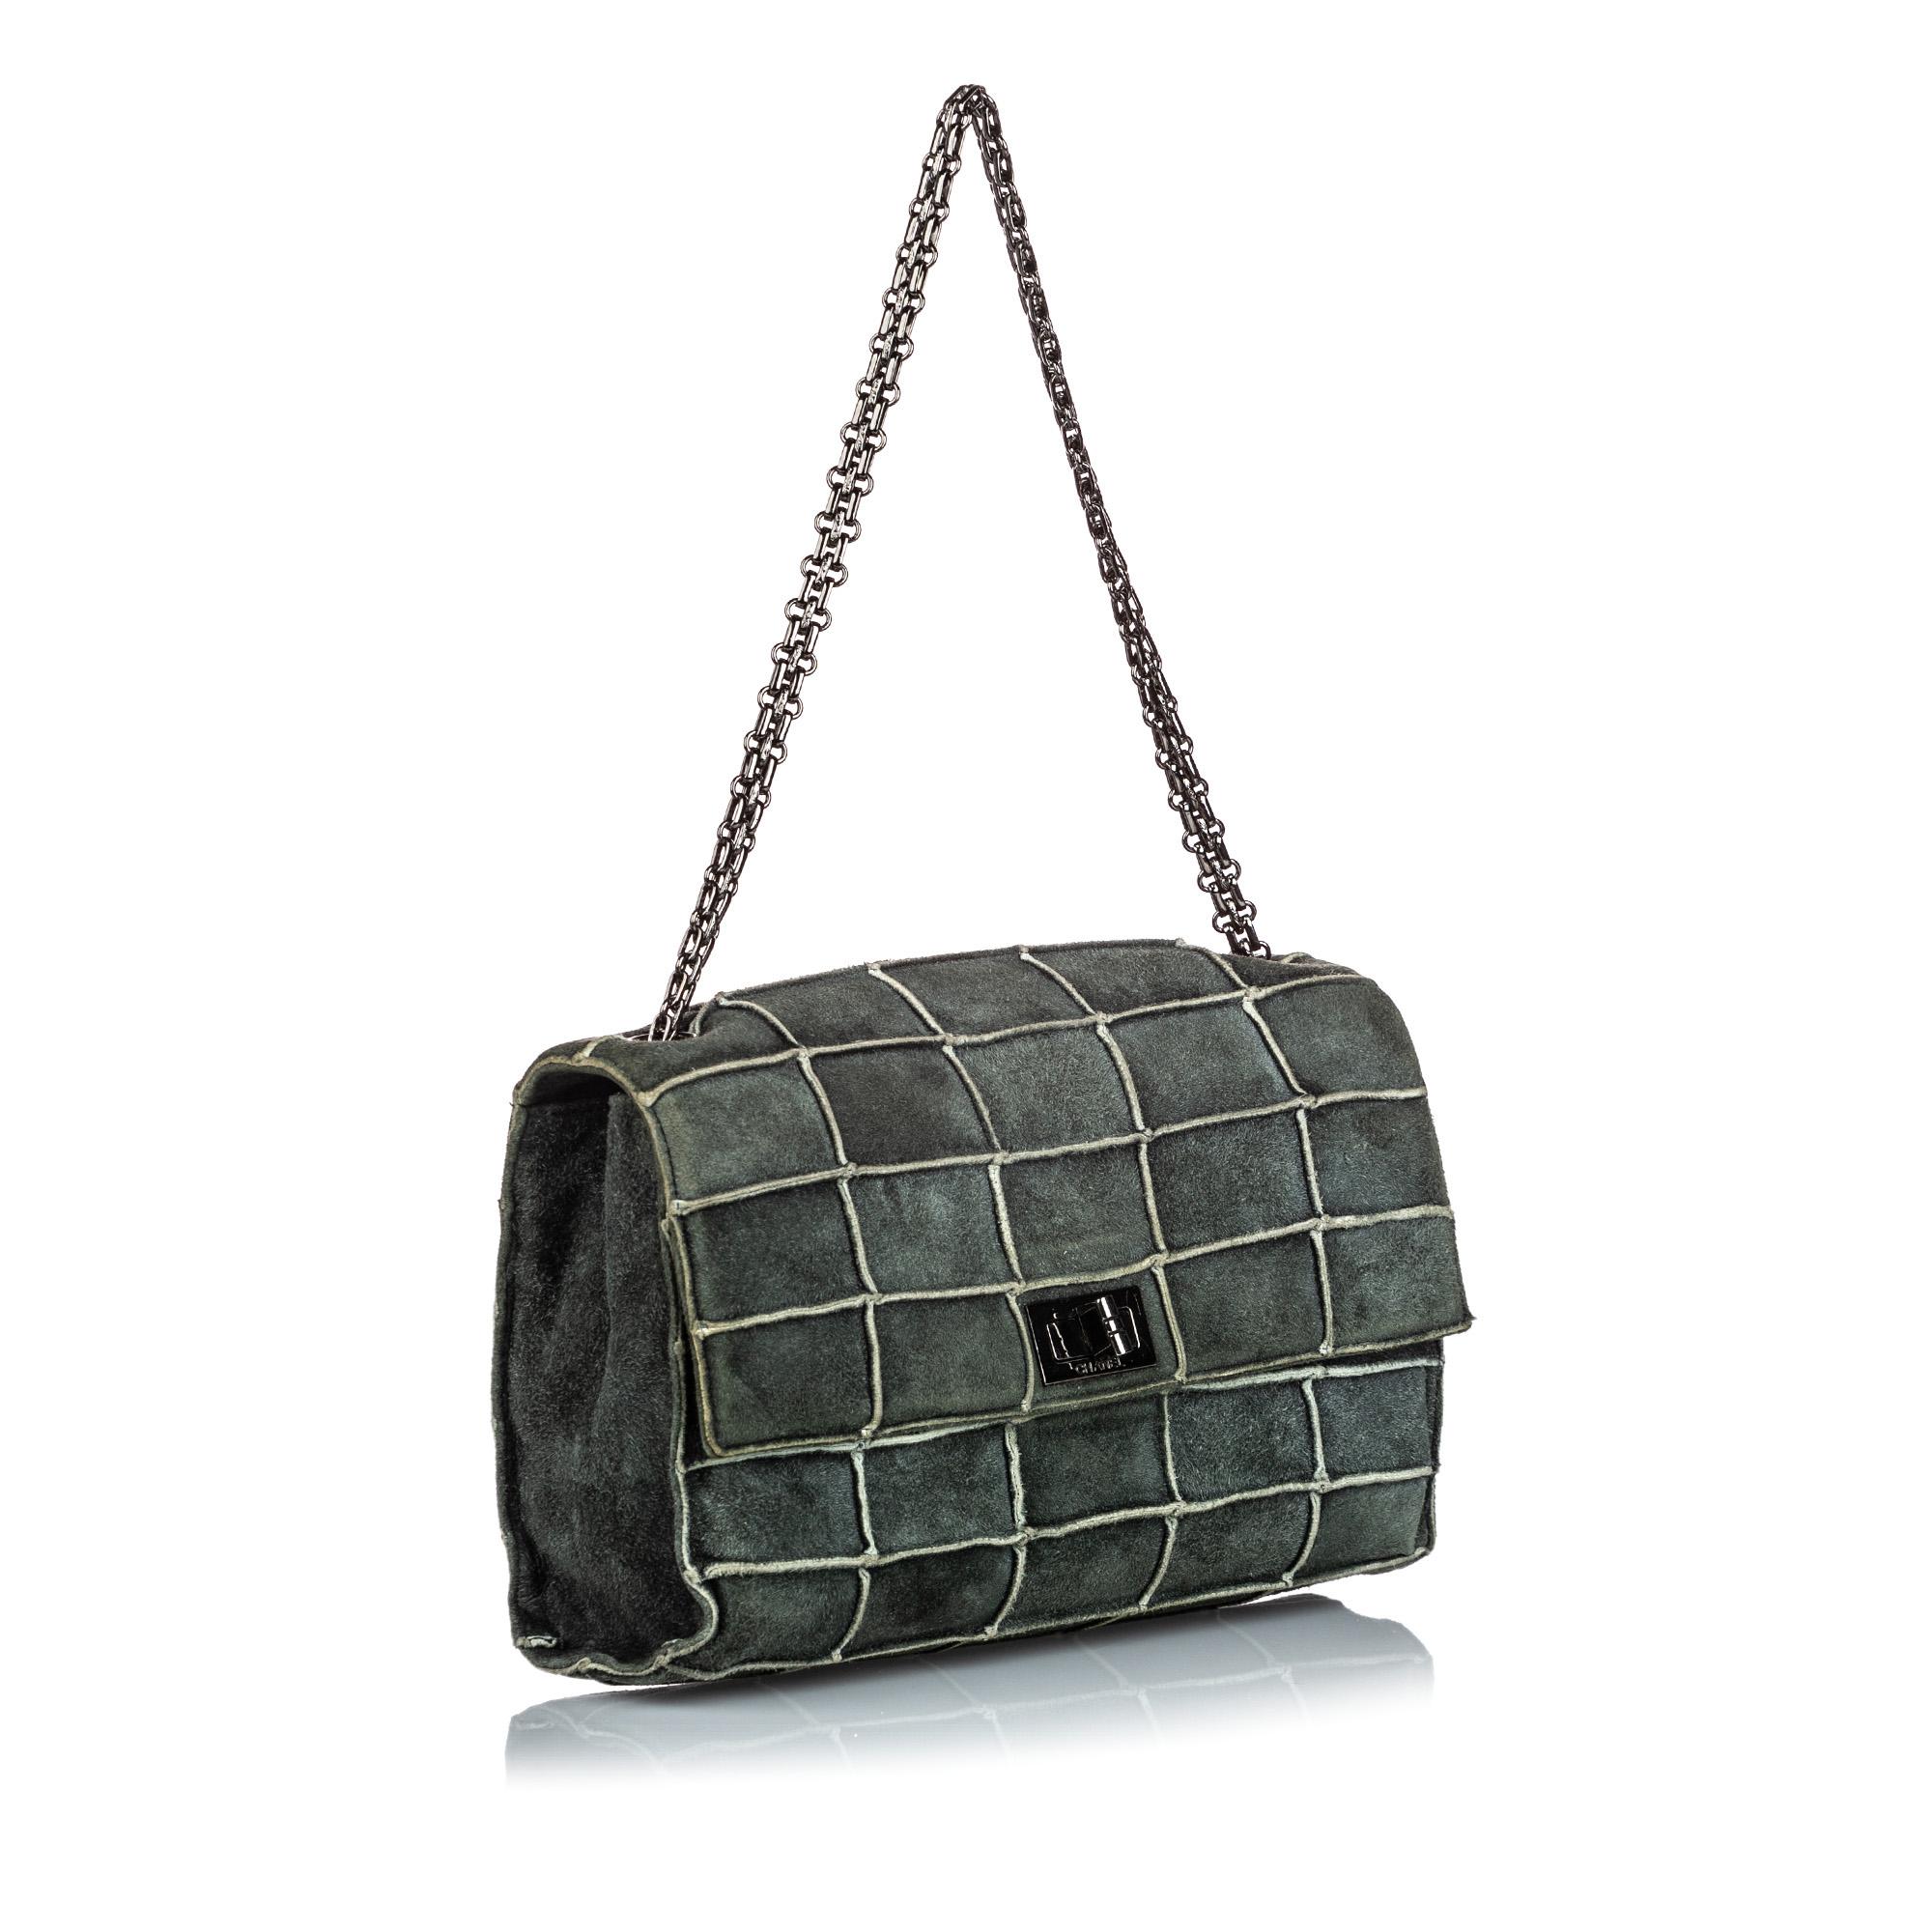 The Reissue Patchwork Flap shoulder bag features a suede patchwork body, a silver-tone chain strap, a front flap with the reissue twist lock closure, and an interior zip pocket. It carries as B+ condition rating.

Inclusions: 
Authenticity